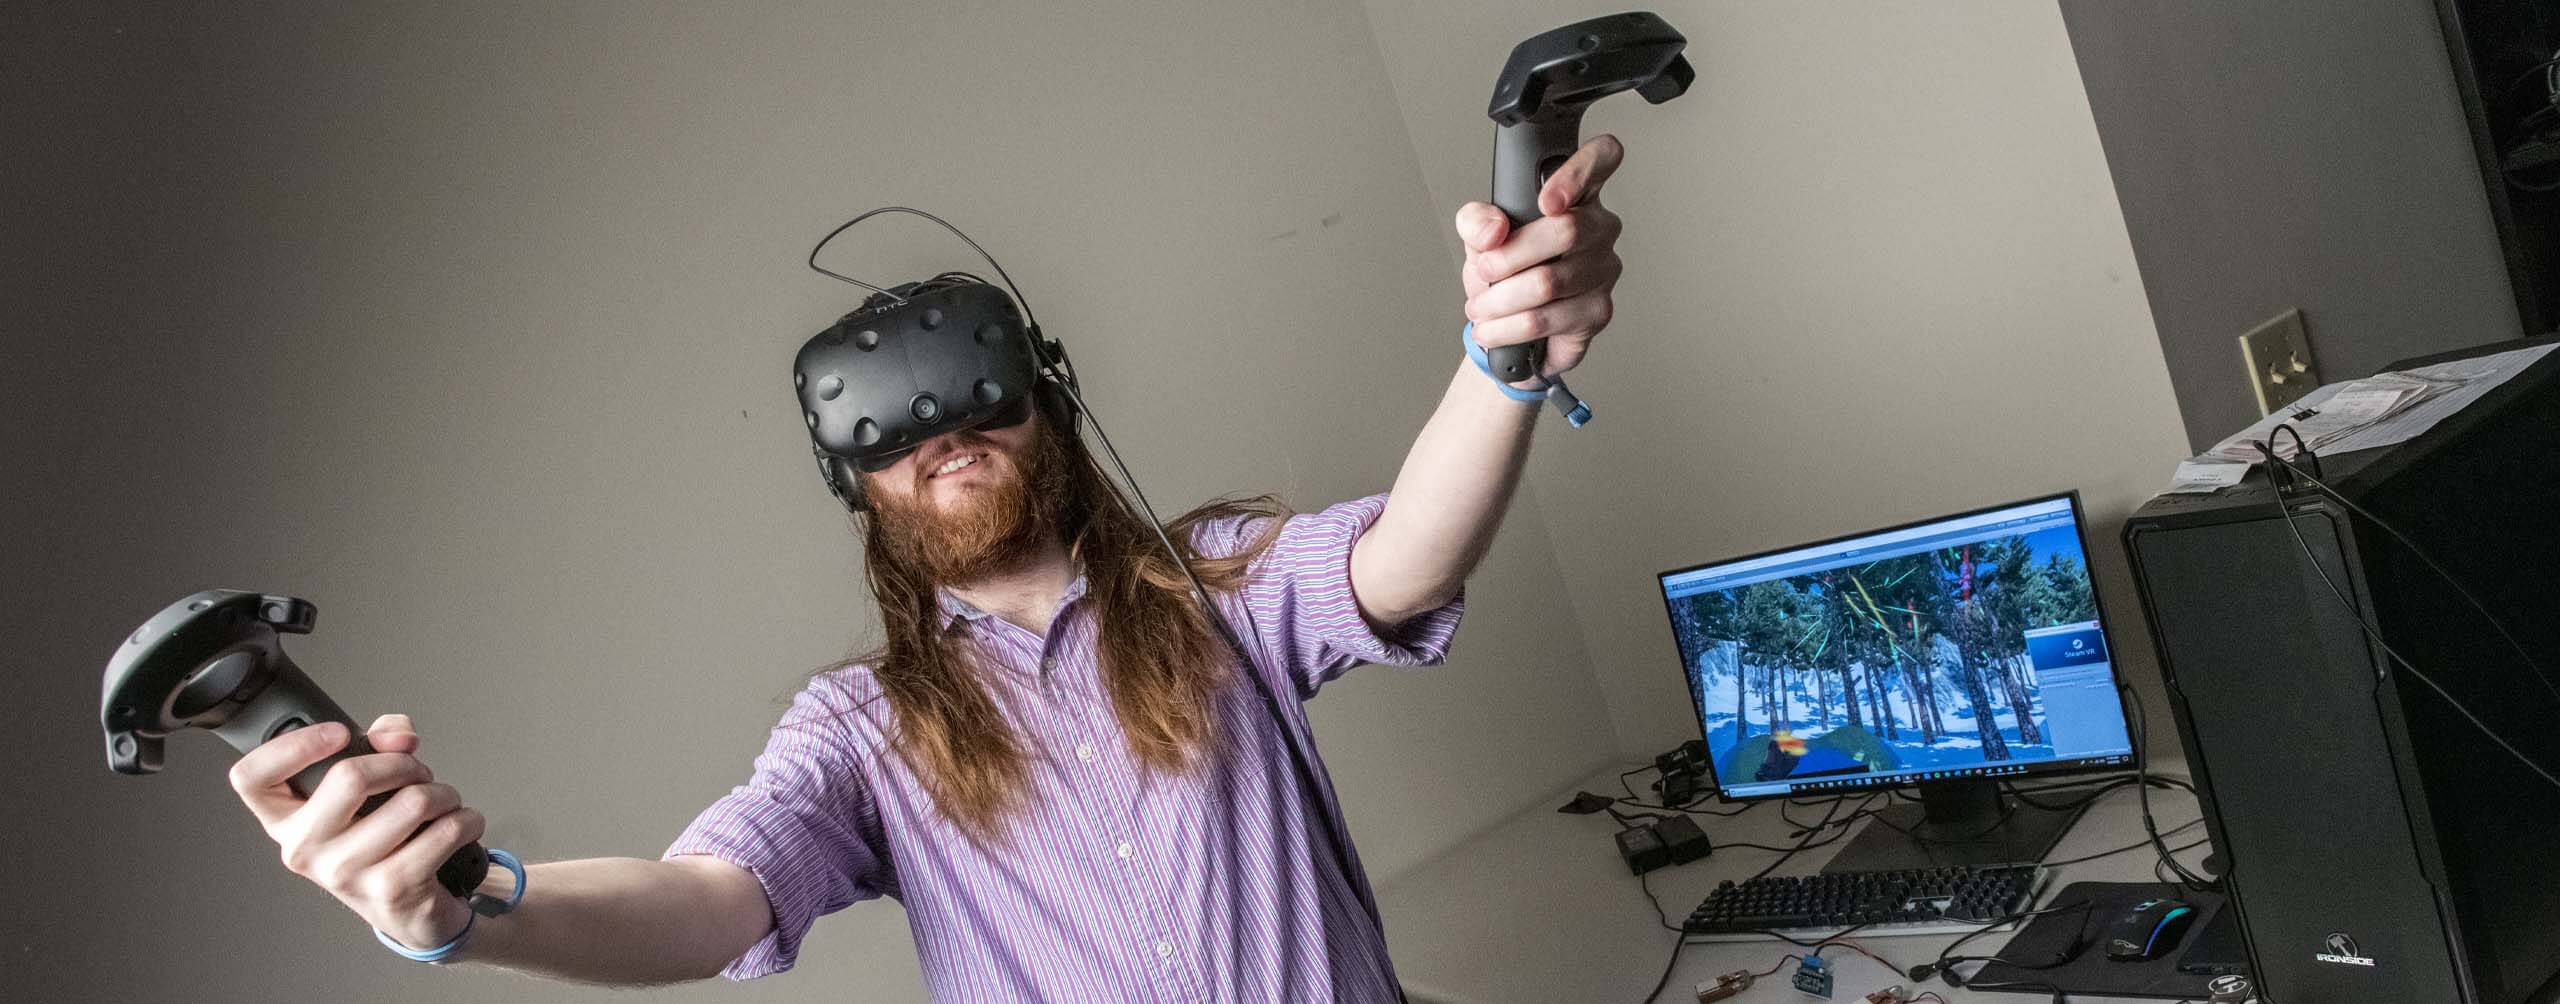 A photo of a person wearing a VR headset and holding conrollers